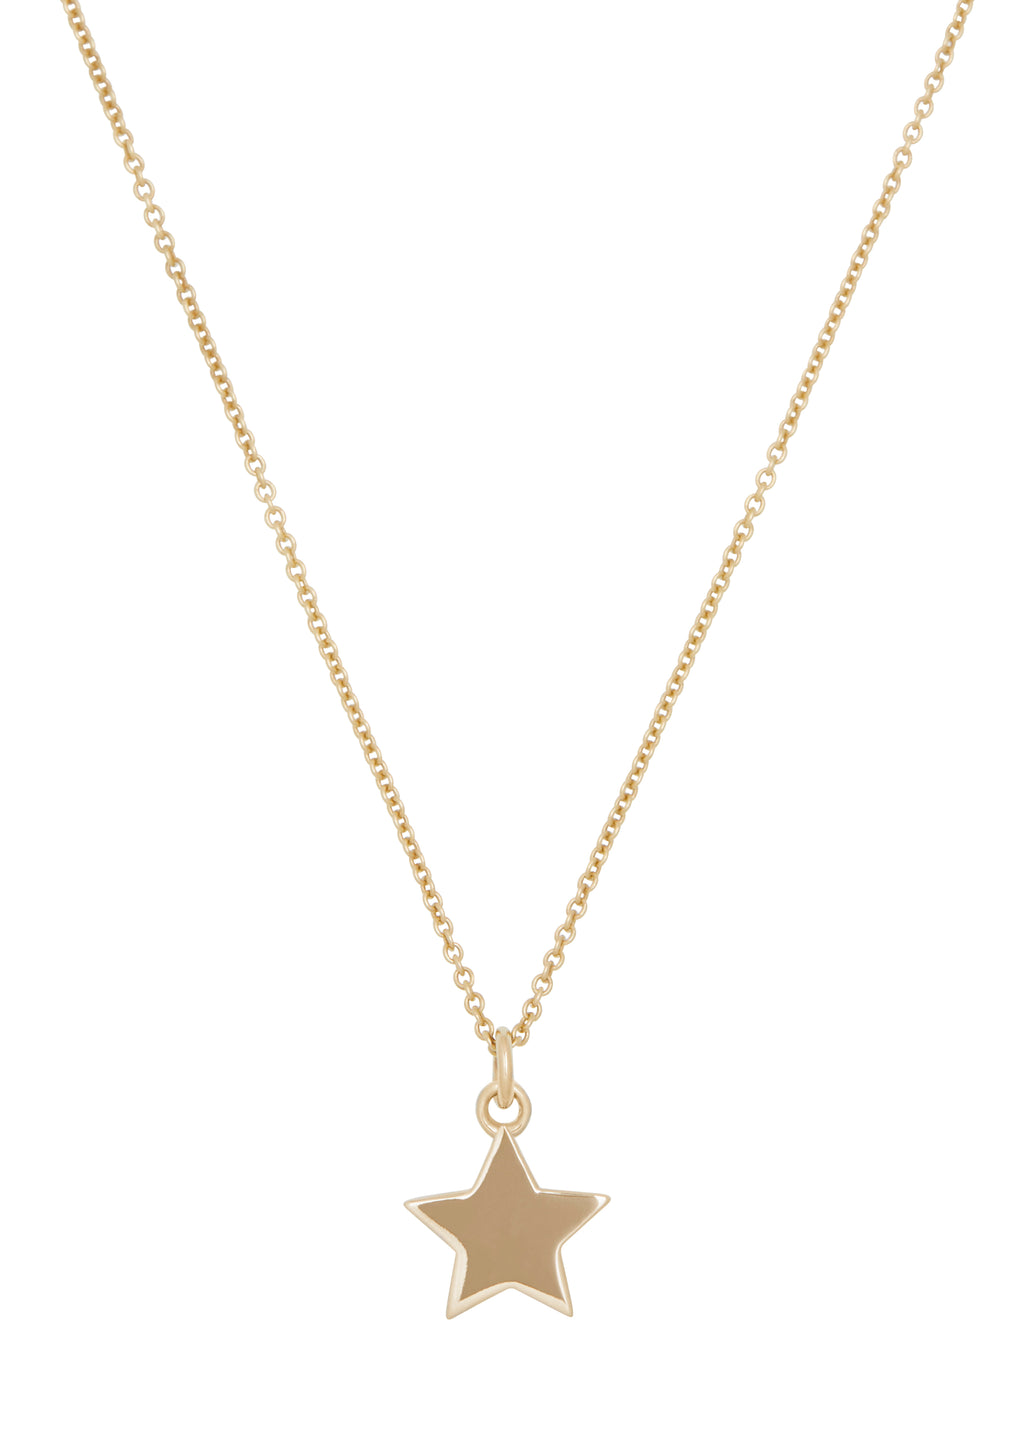 Star Necklace in 14k